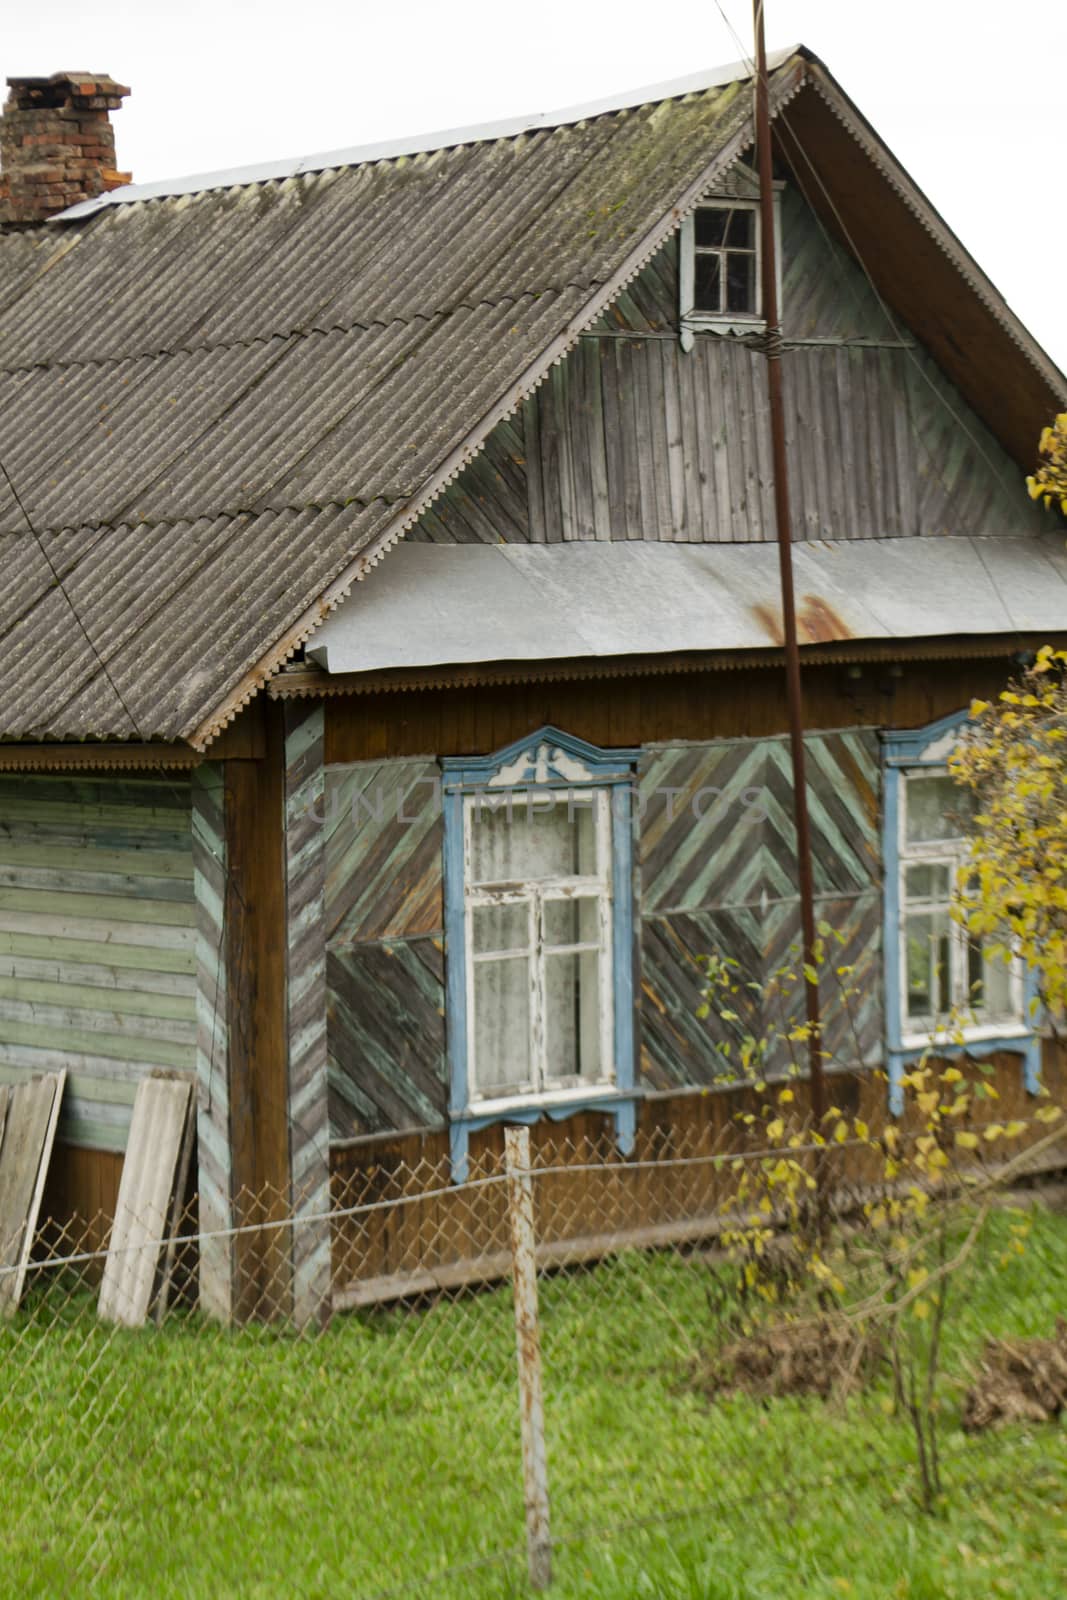 Old traditional wooden house with slate roof in village, Belarus. Vertical image